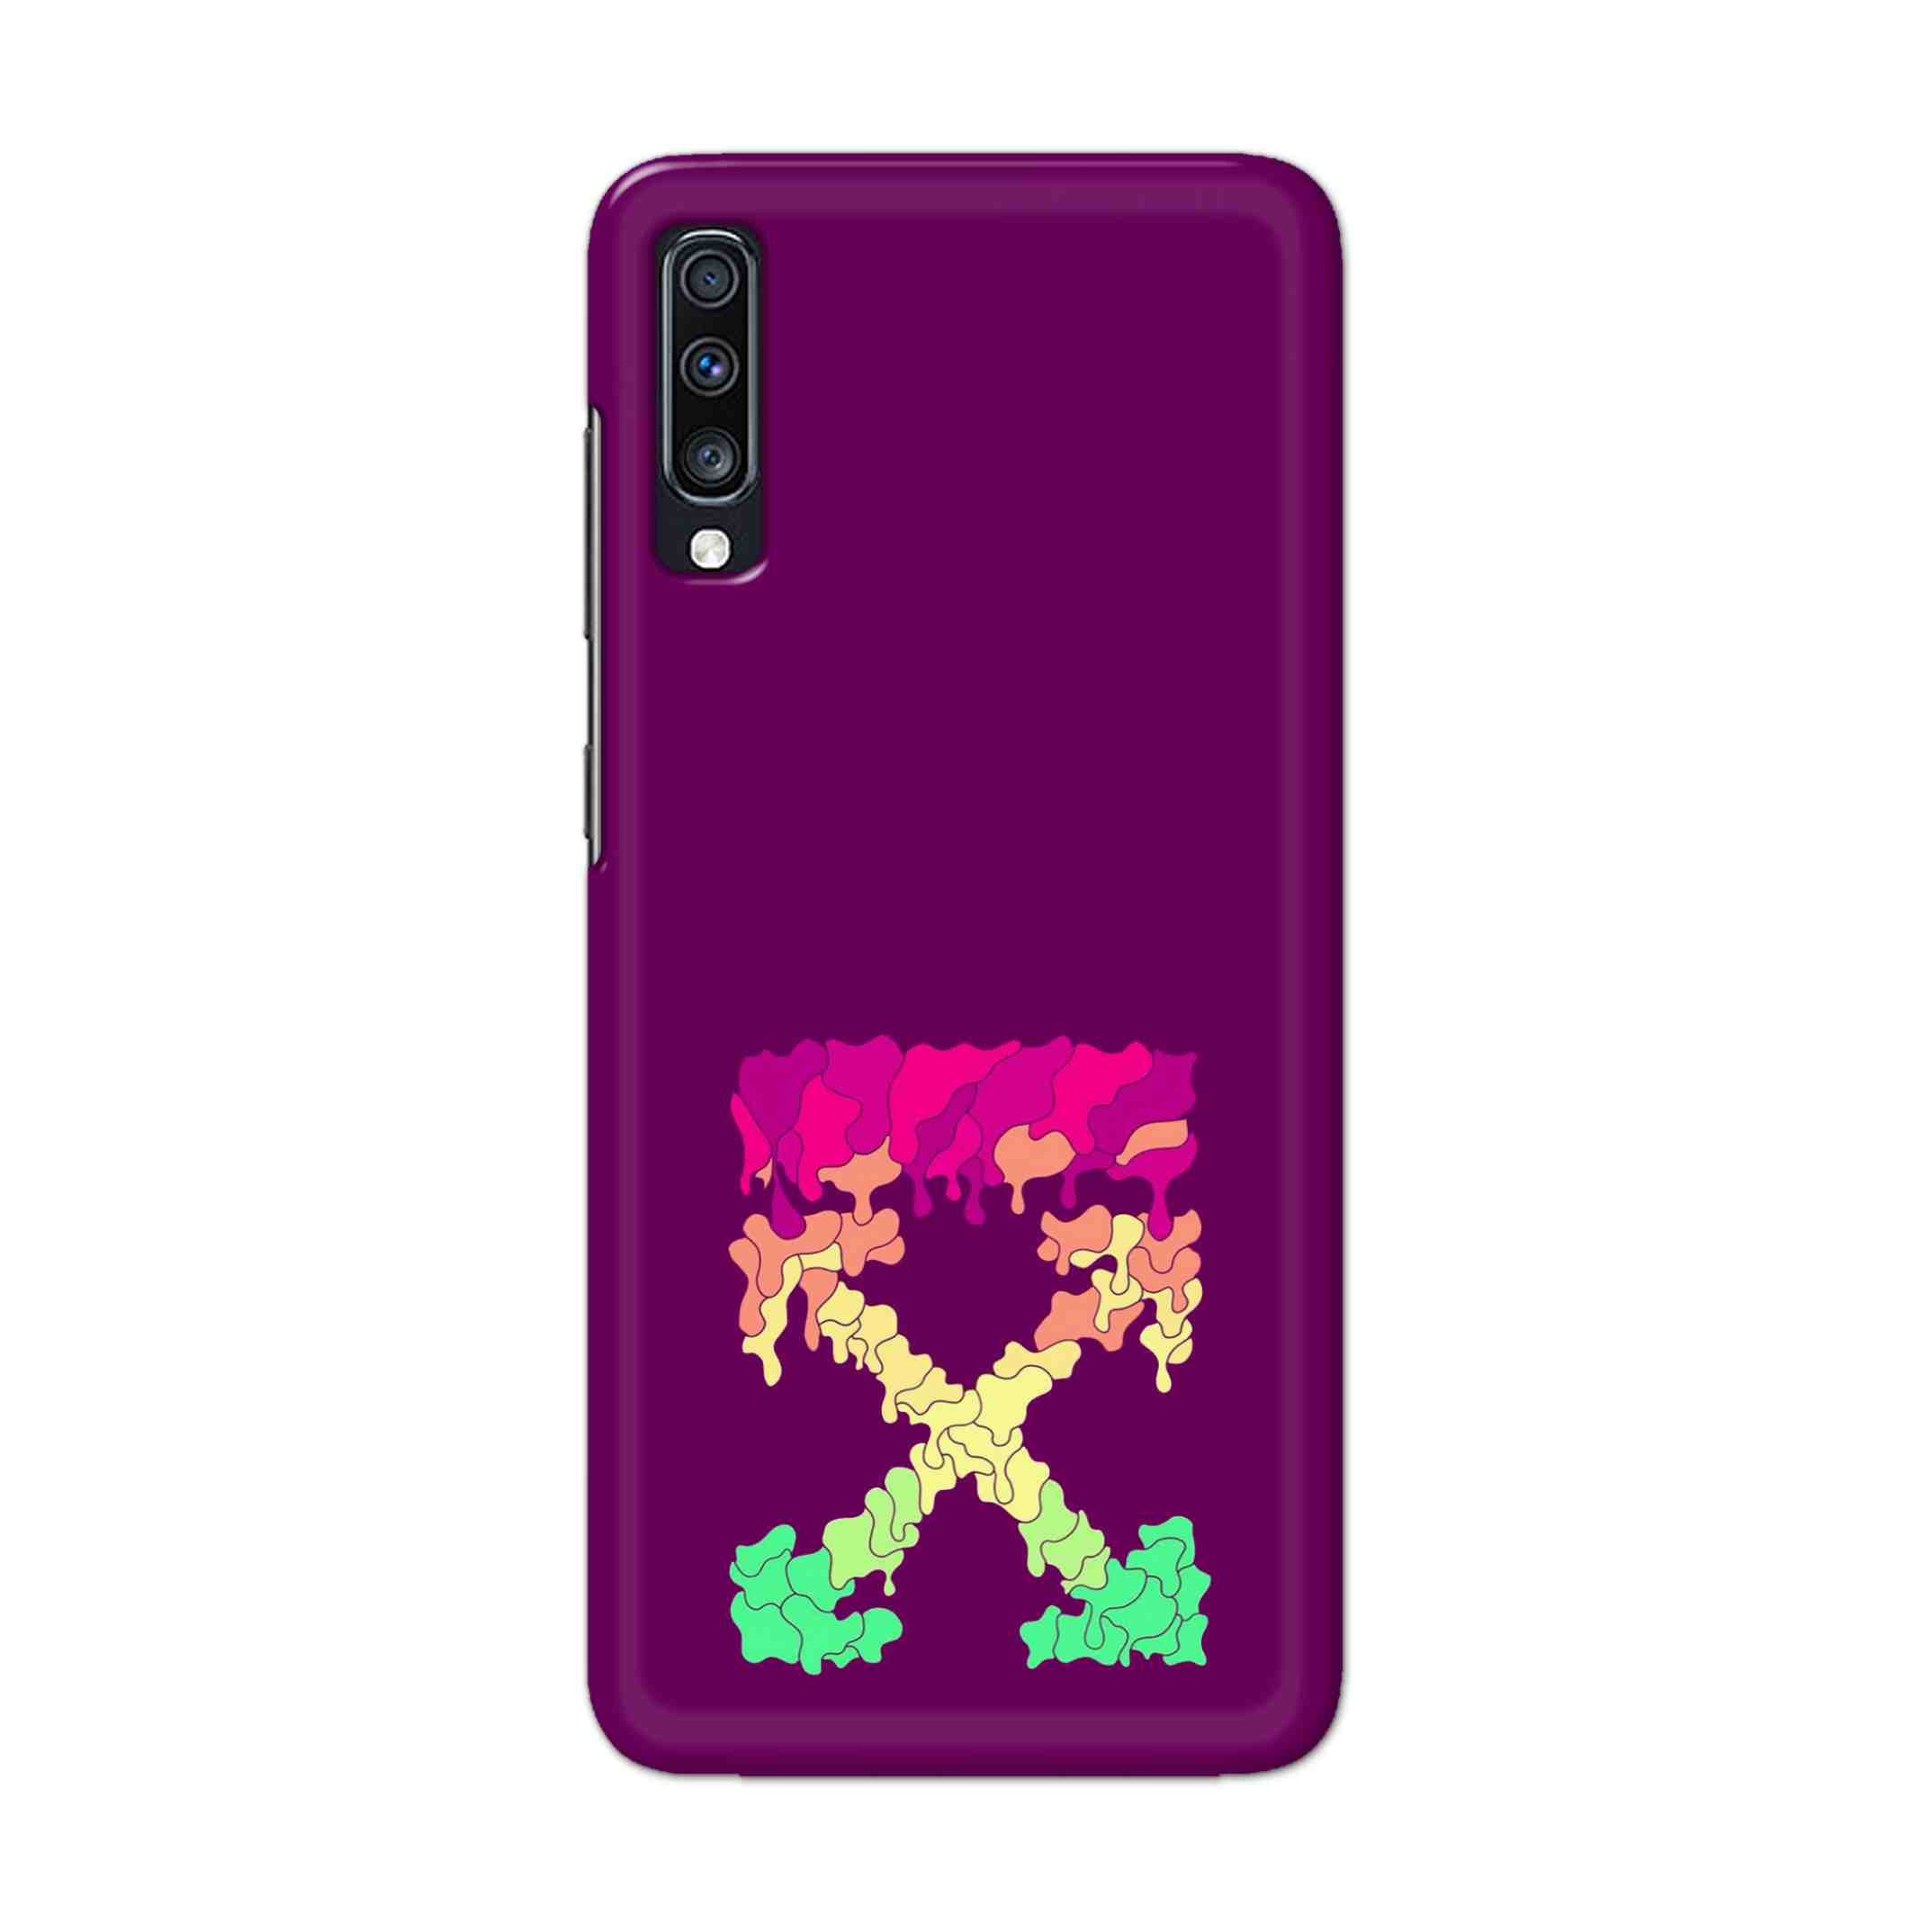 Buy X.O Hard Back Mobile Phone Case Cover For Samsung Galaxy A70 Online